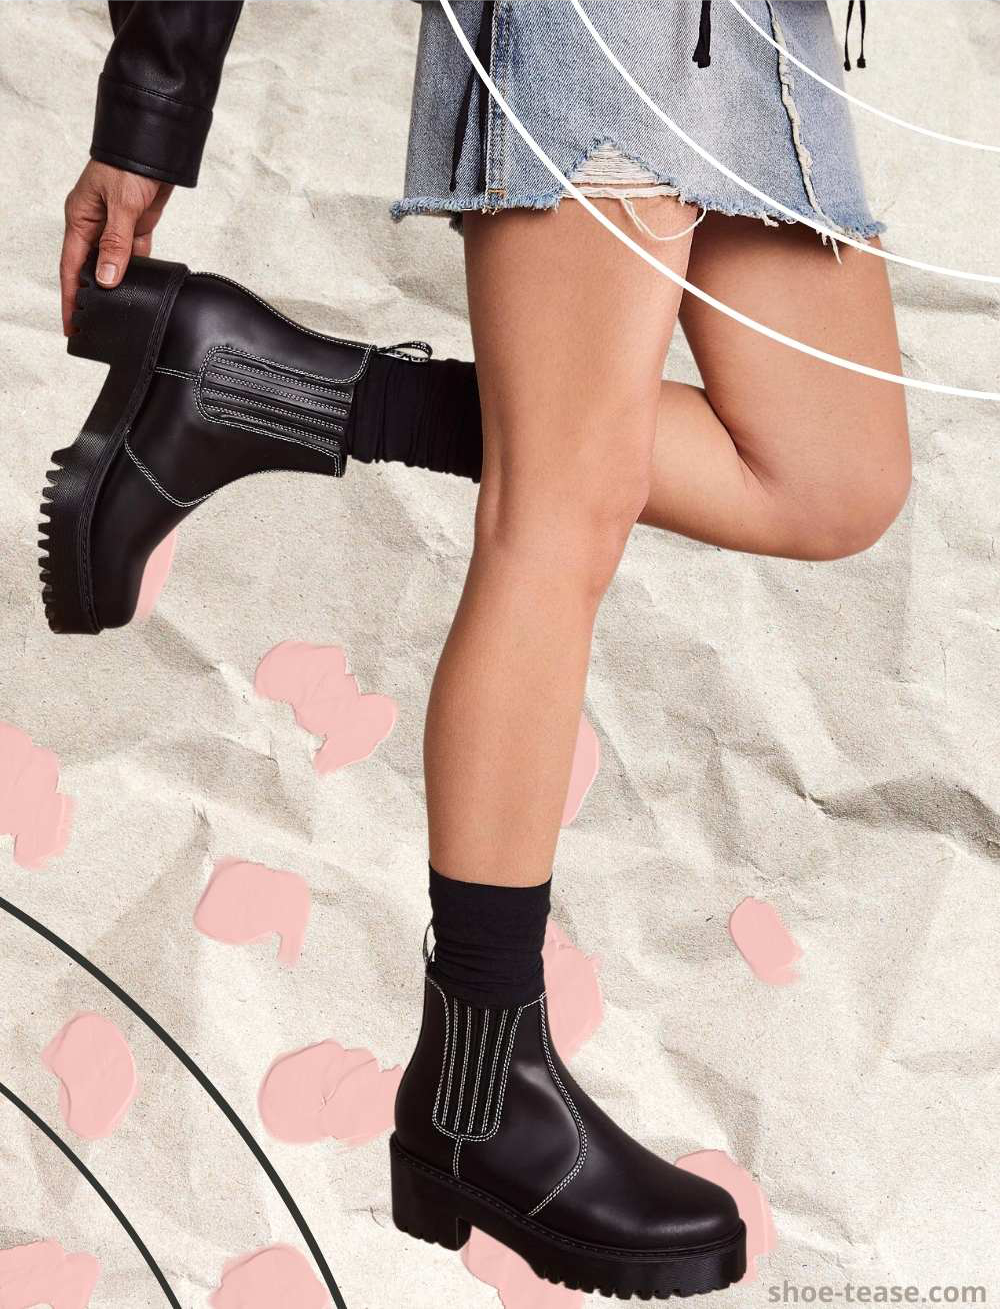 Cropped view of woman's legs wearing a chelsea boots outfit with black socks and a distressed denim midi skirt.